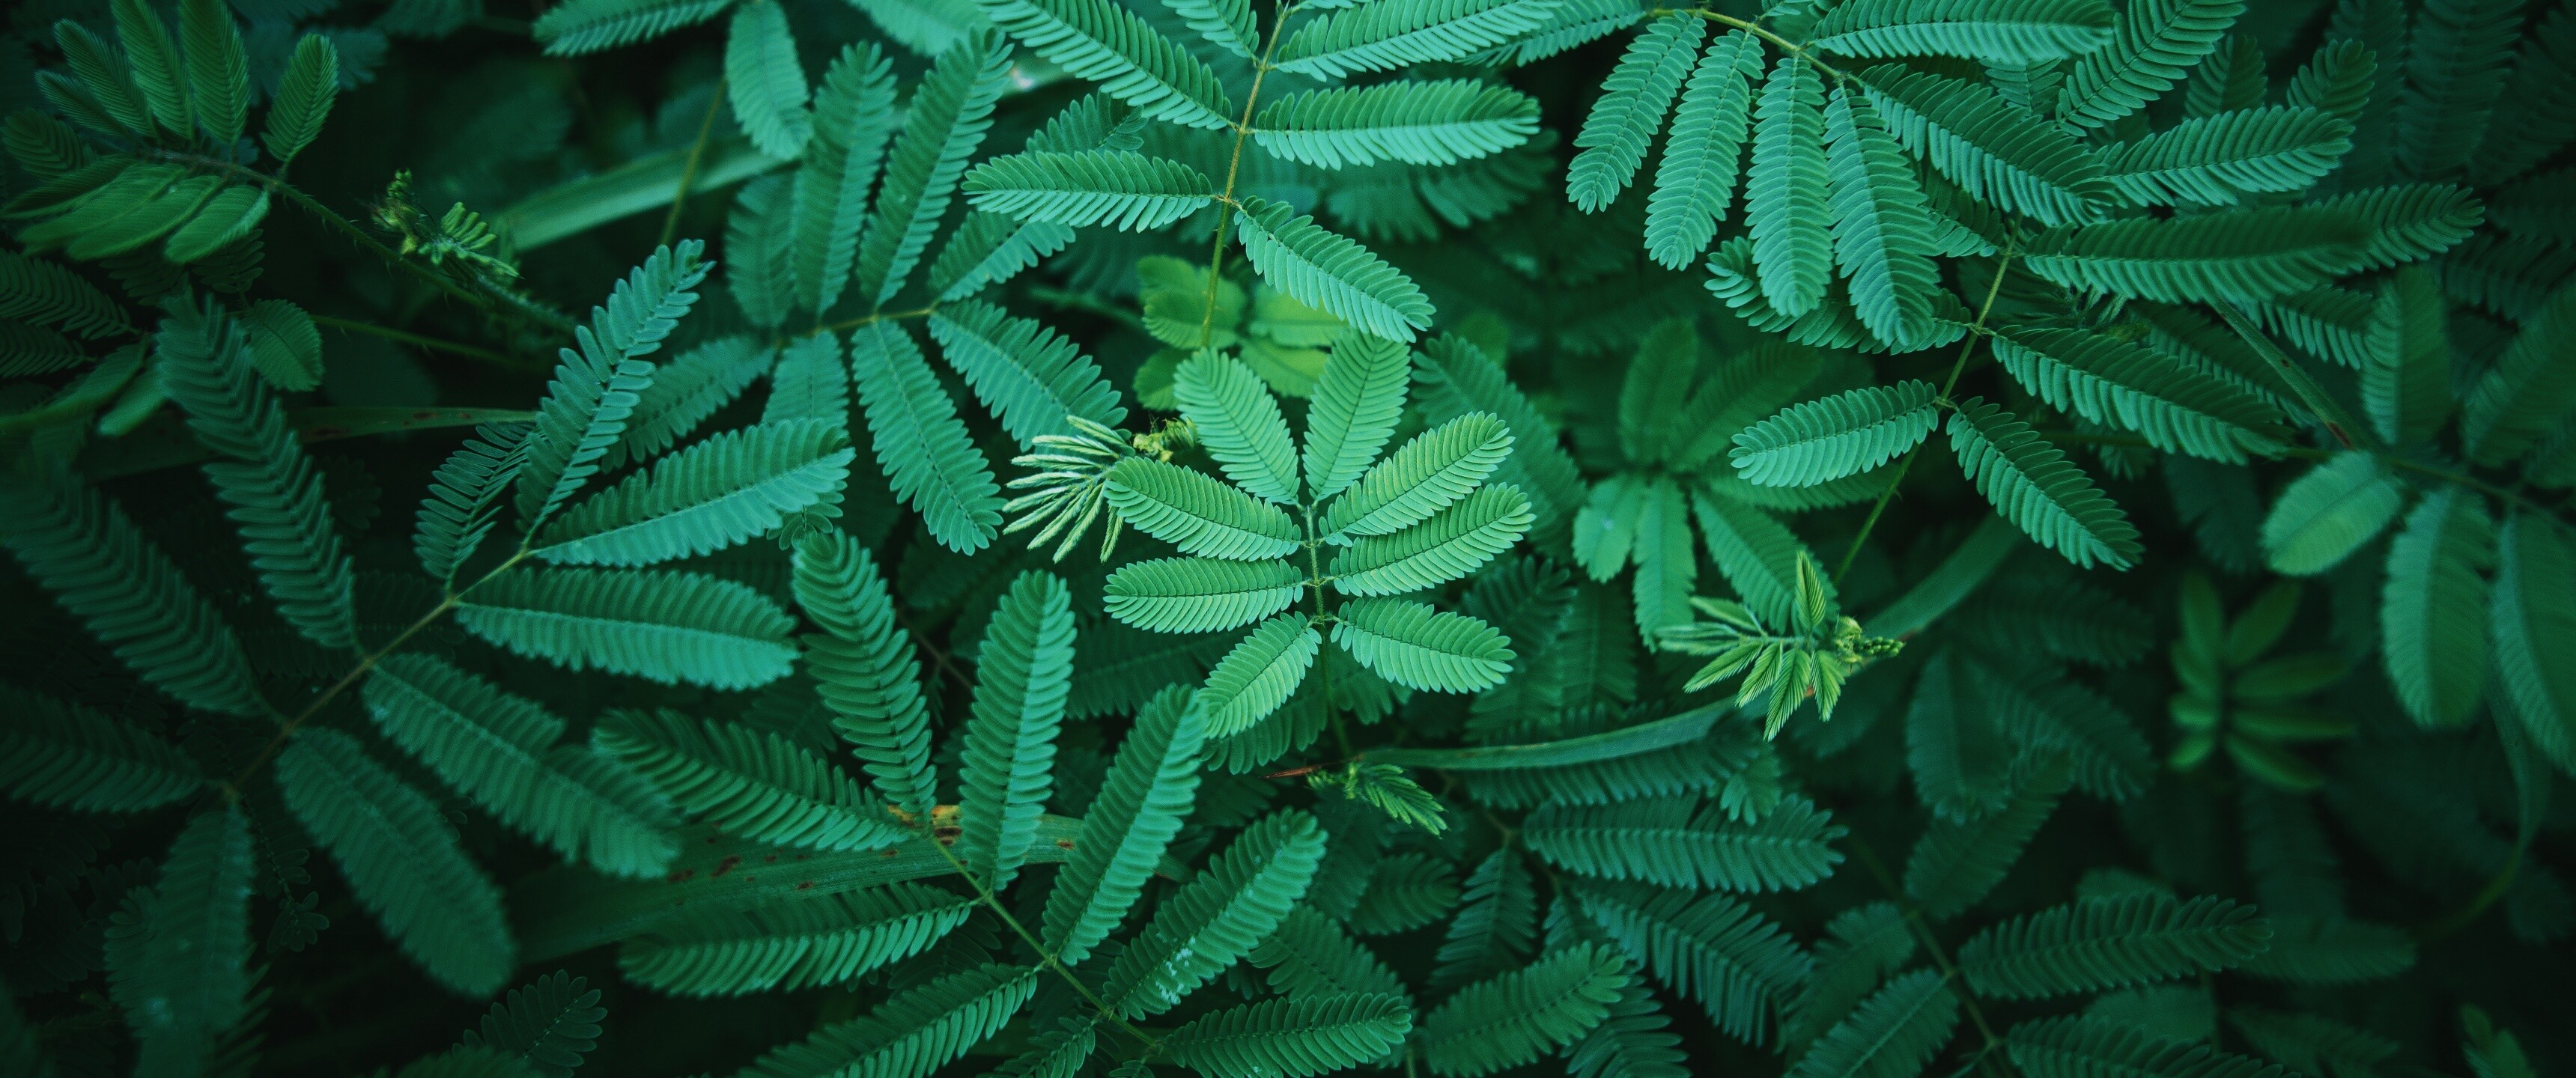 Leaf: Green, Spring, Nature, Terrestrial plant. 3440x1440 Dual Screen Background.